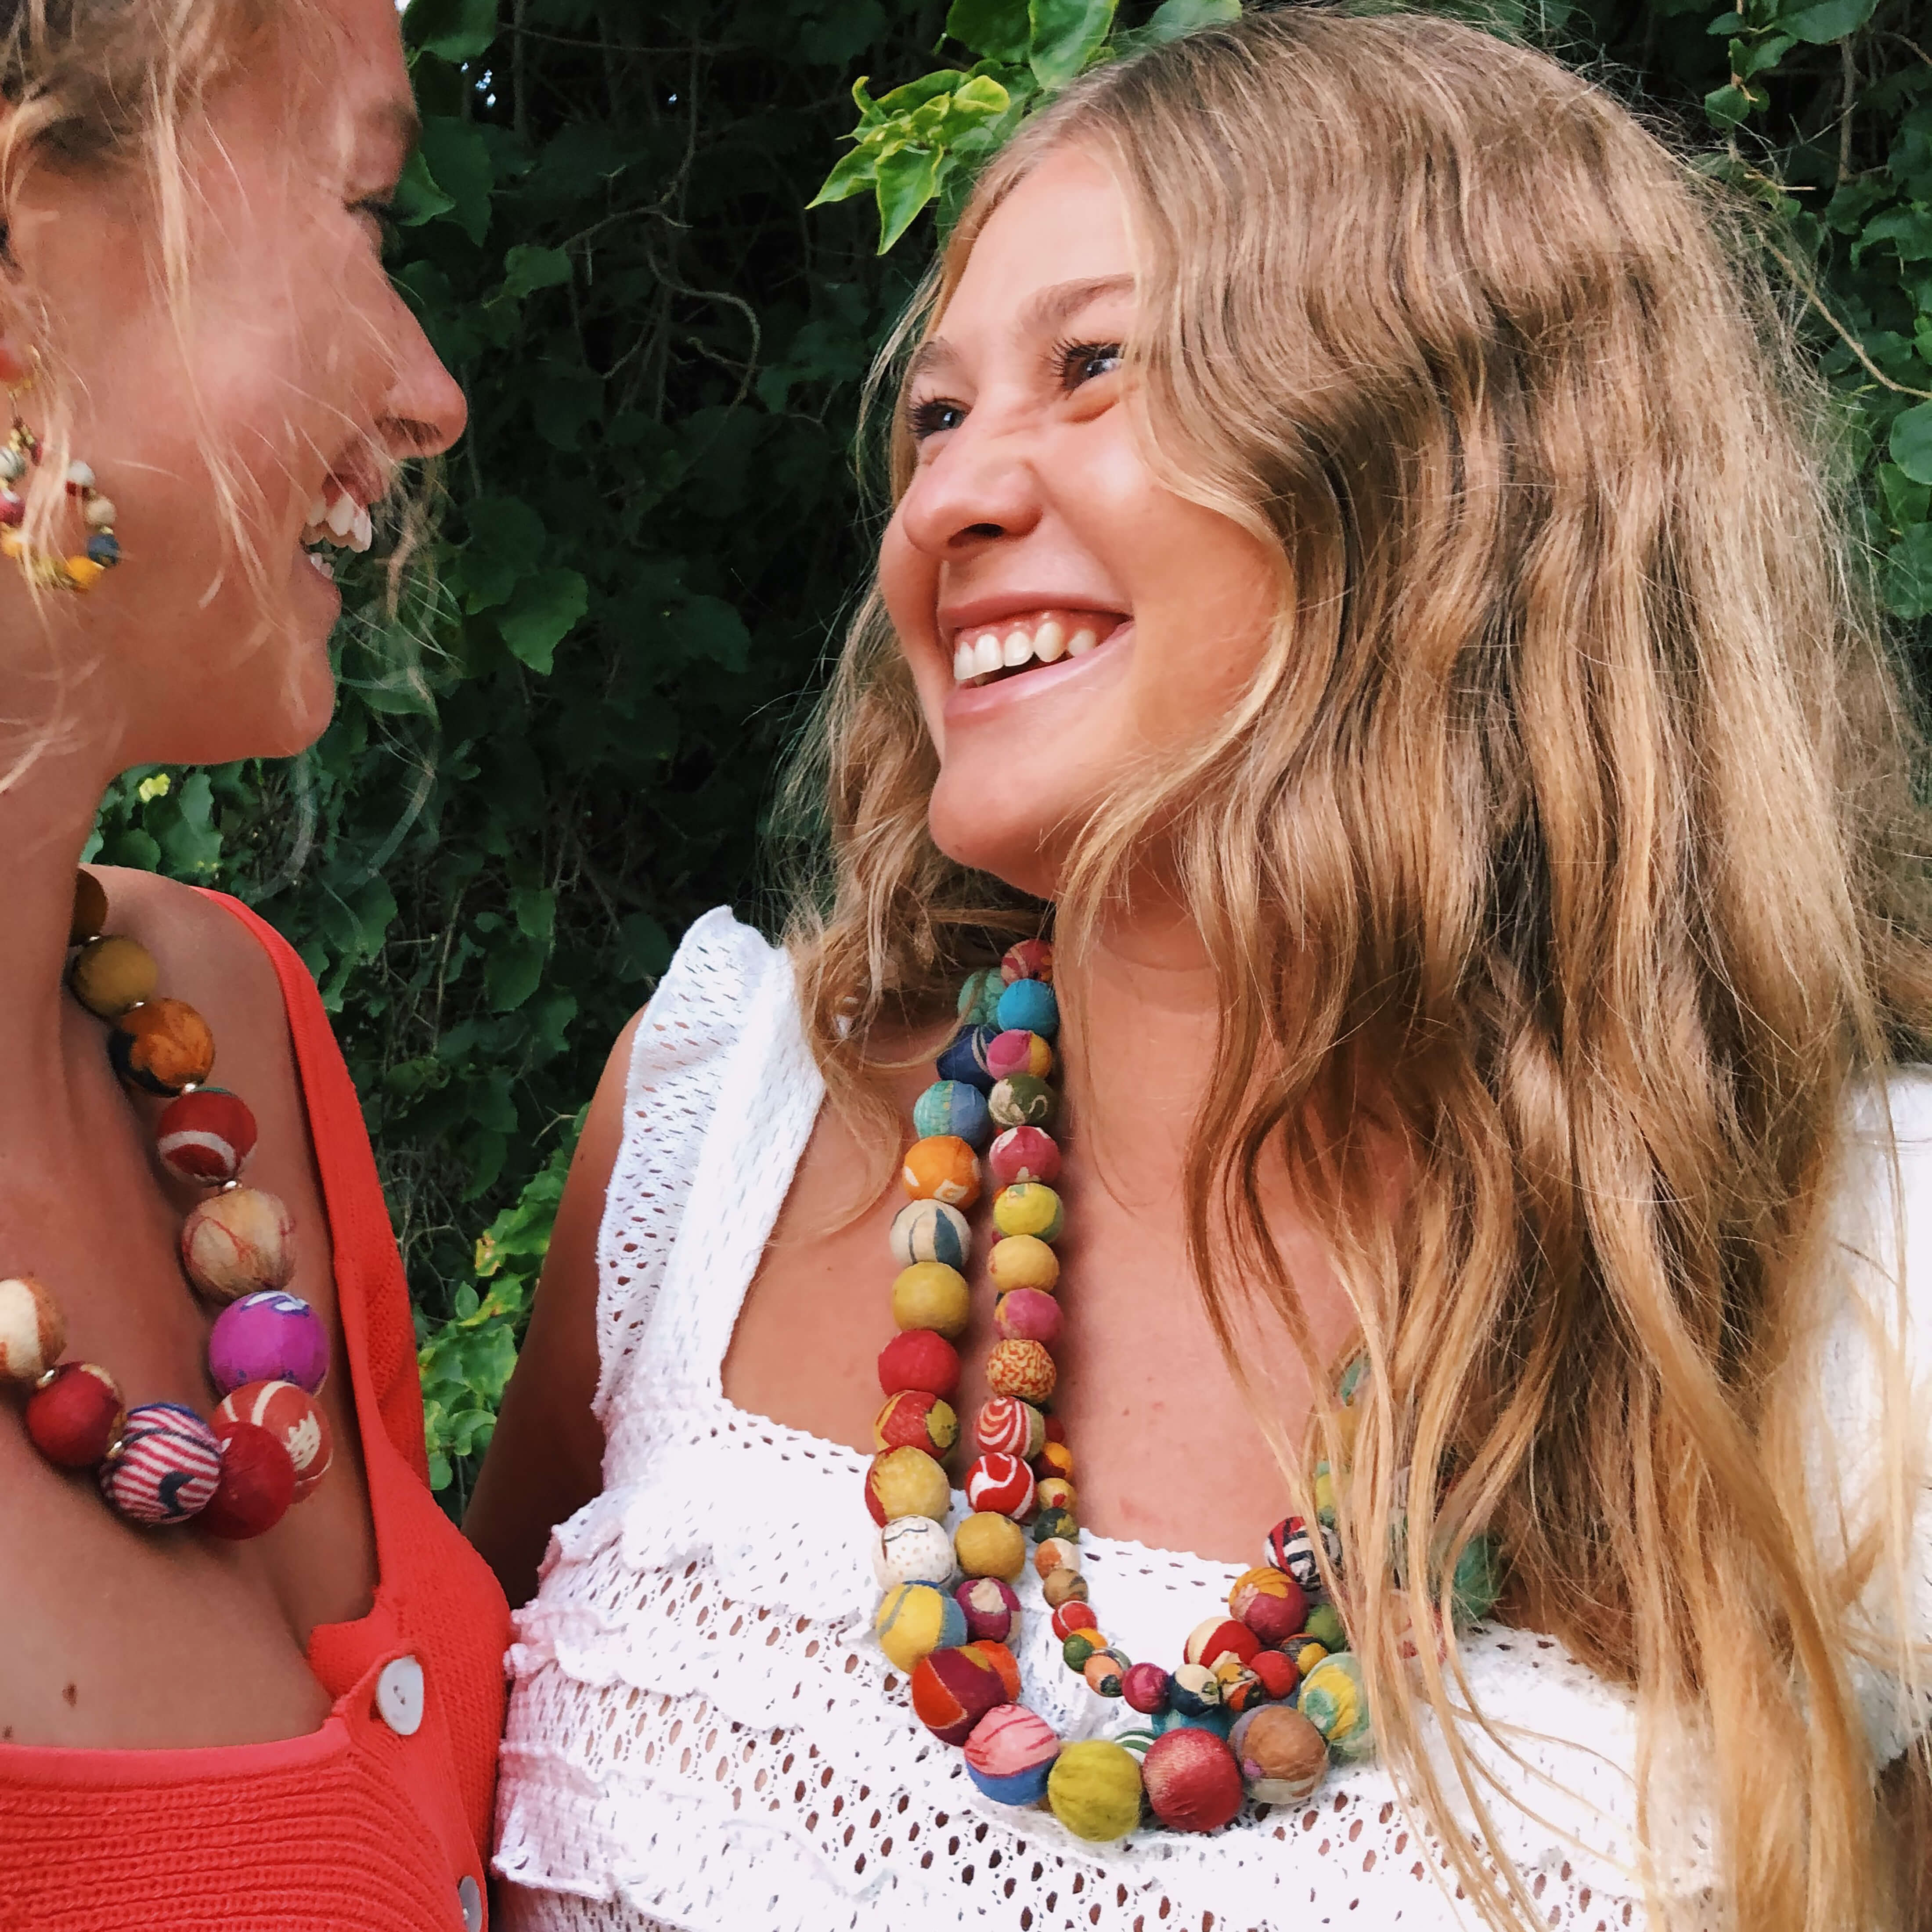 A girl looks at her friends and laughs while wearing the Kantha Calypso Necklace.